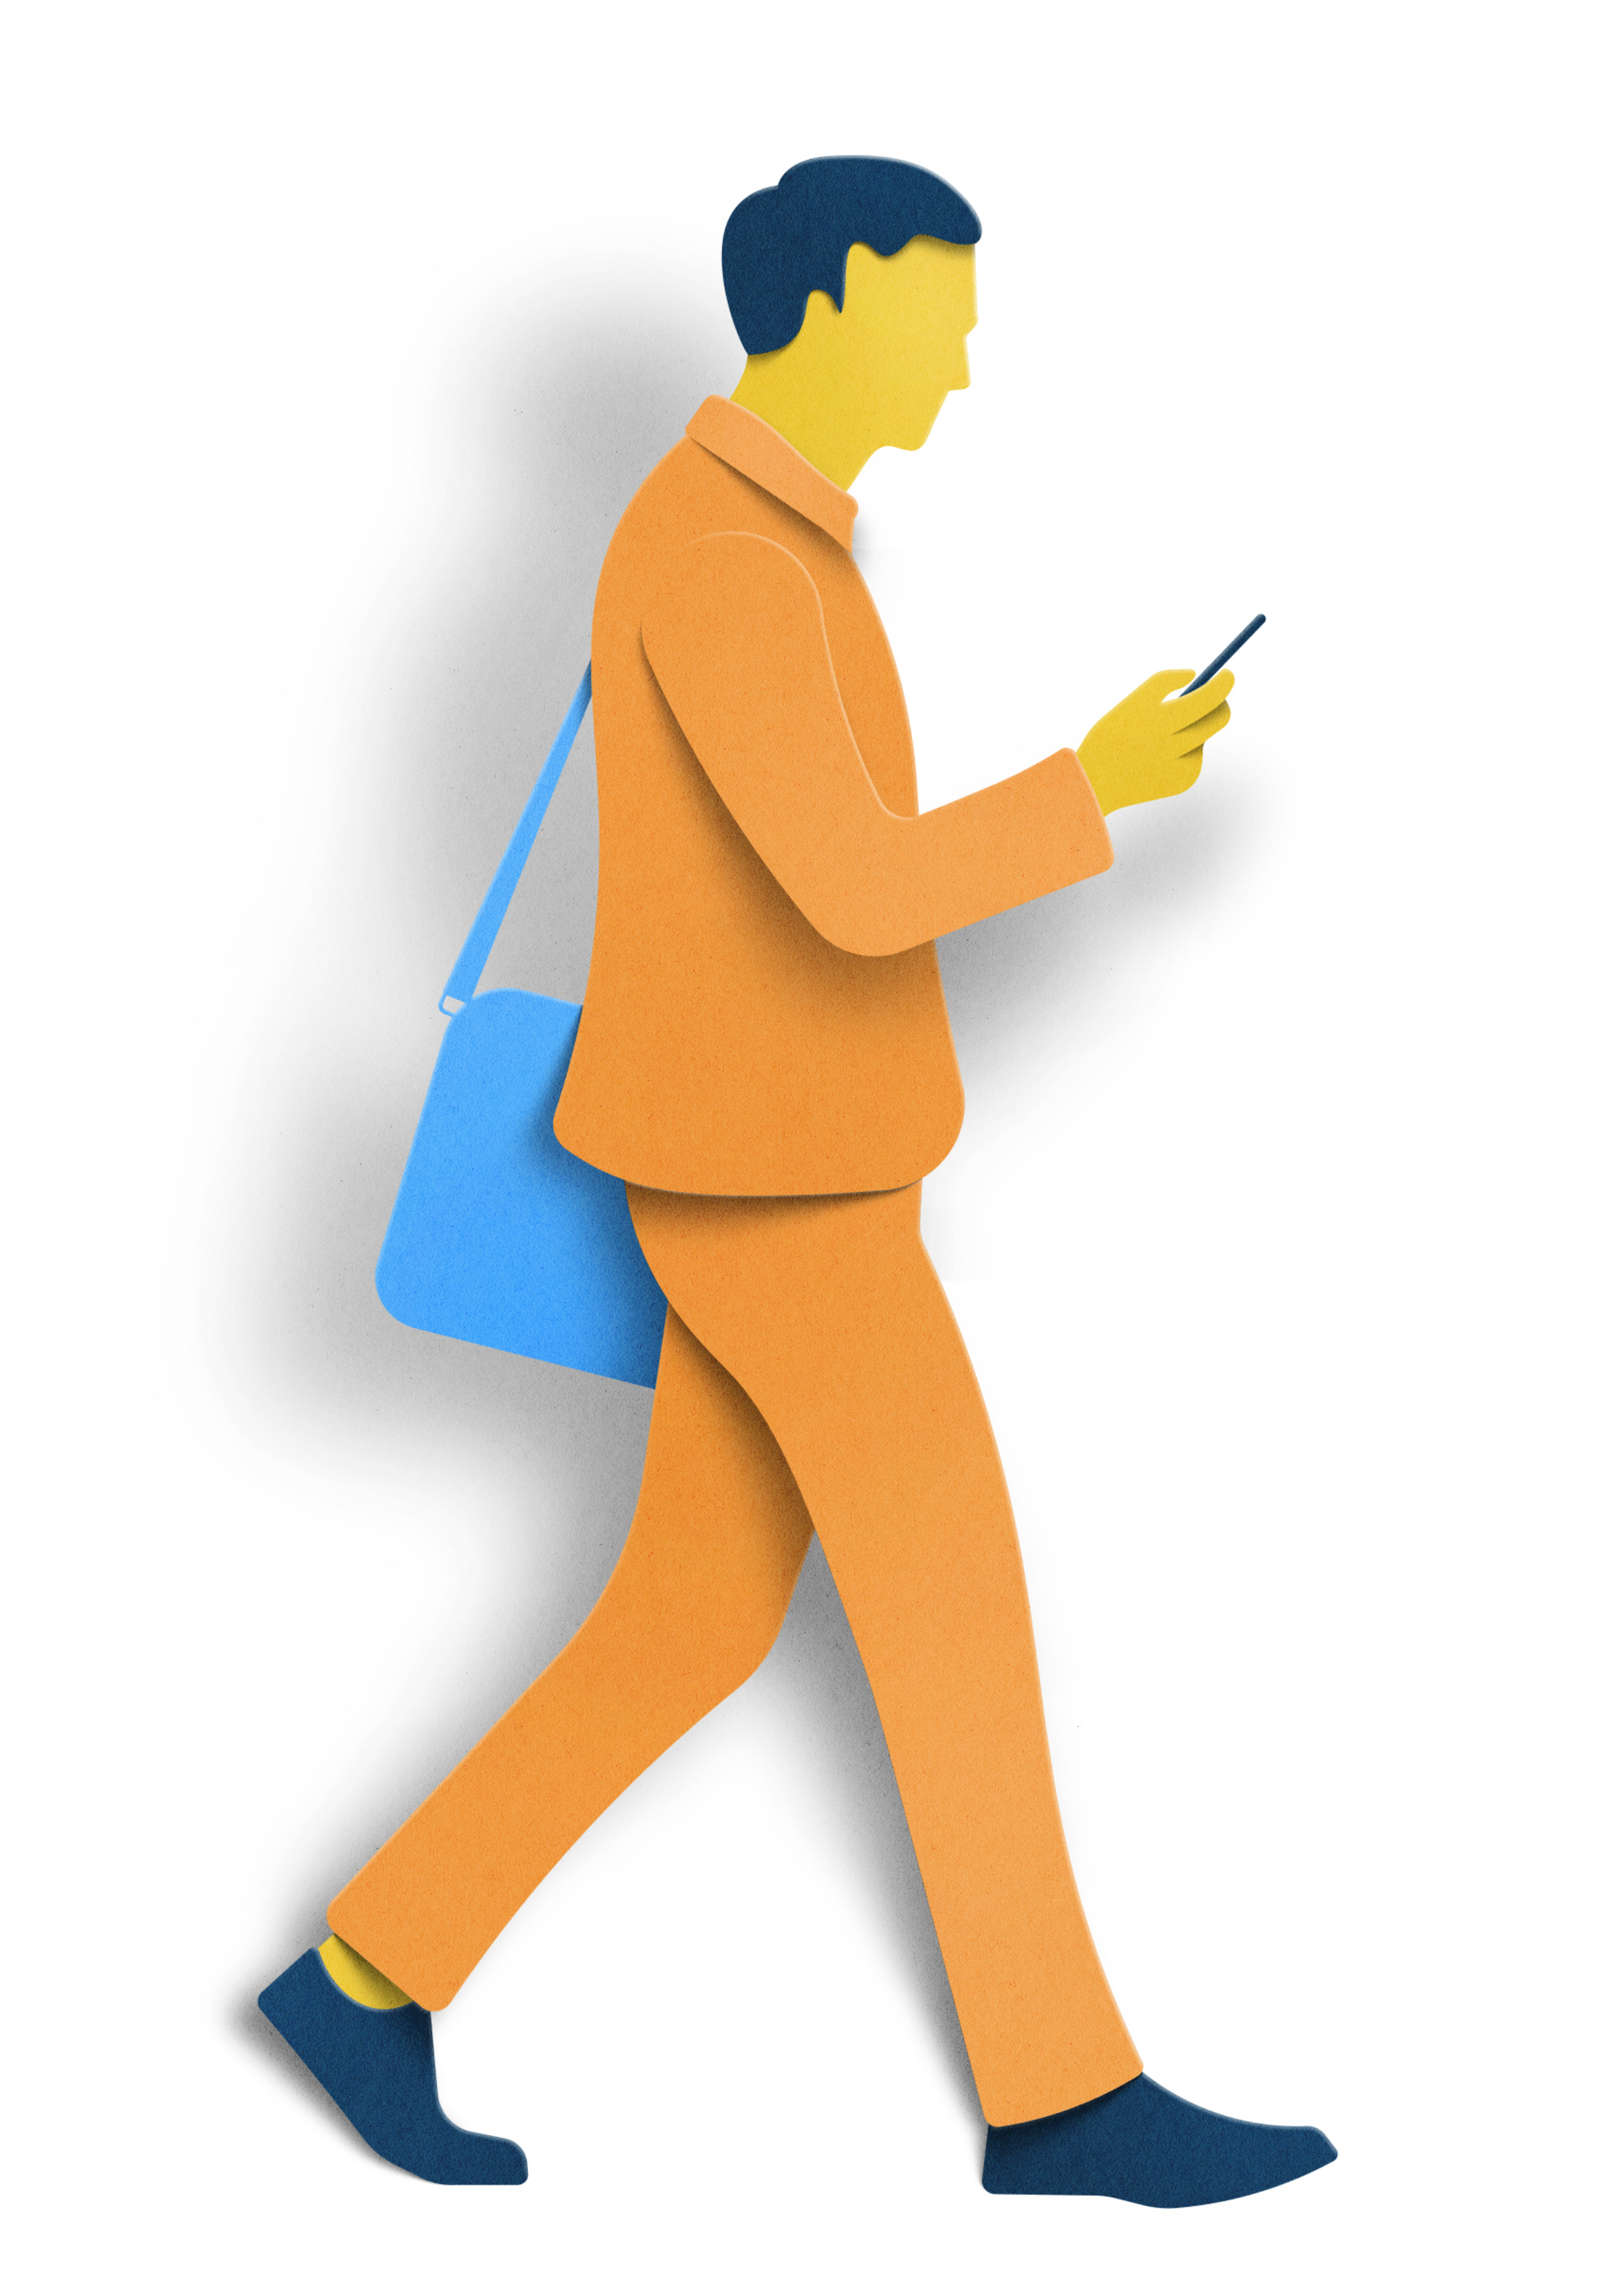 Illustration of a man using a phone and walking